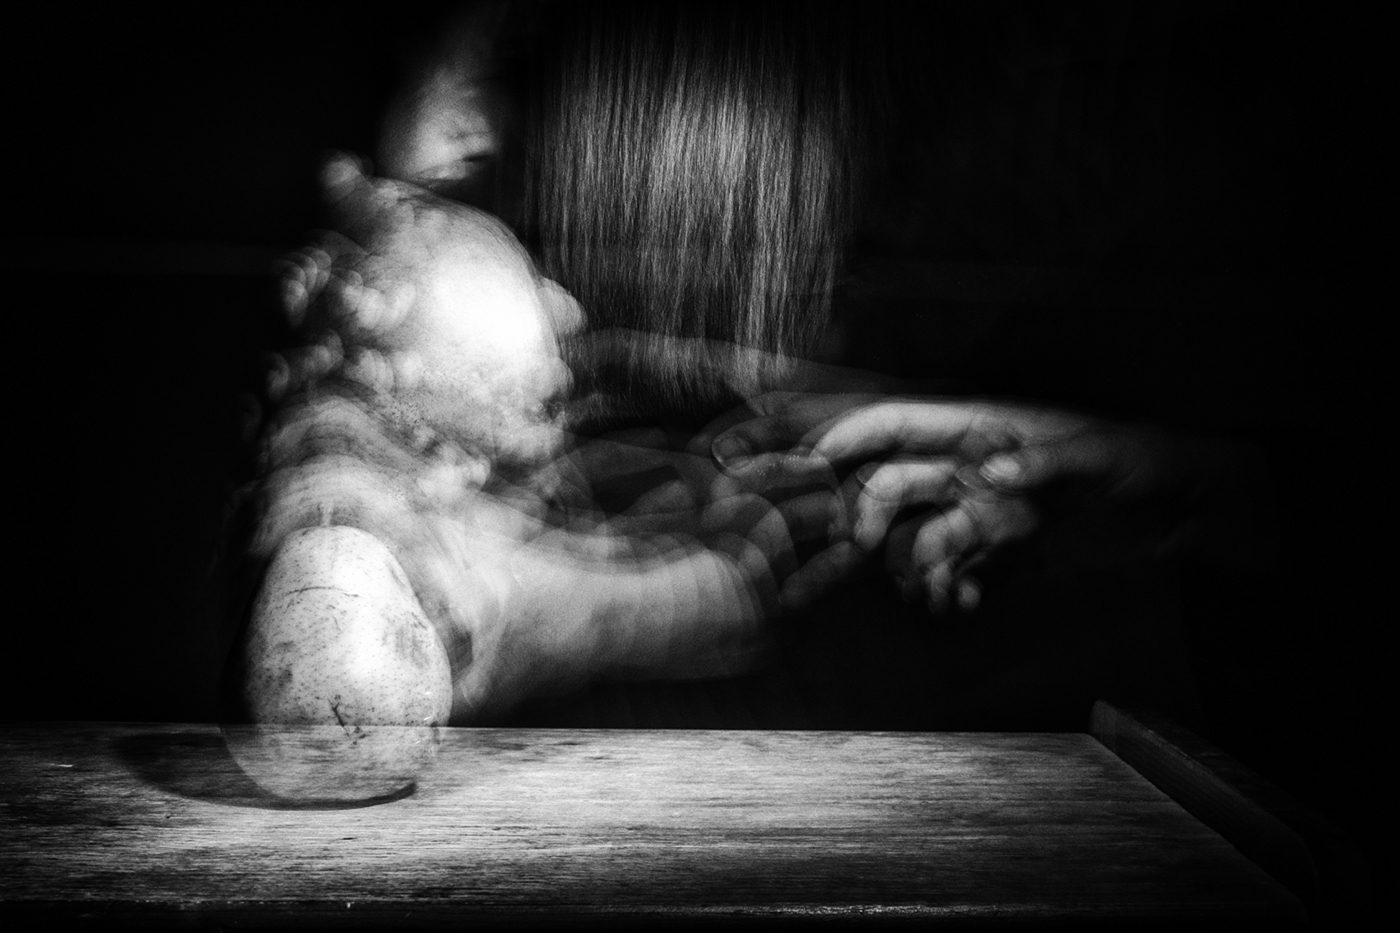 hands strobe Photography  Digital Art  black and white contrast obscure self-portrait